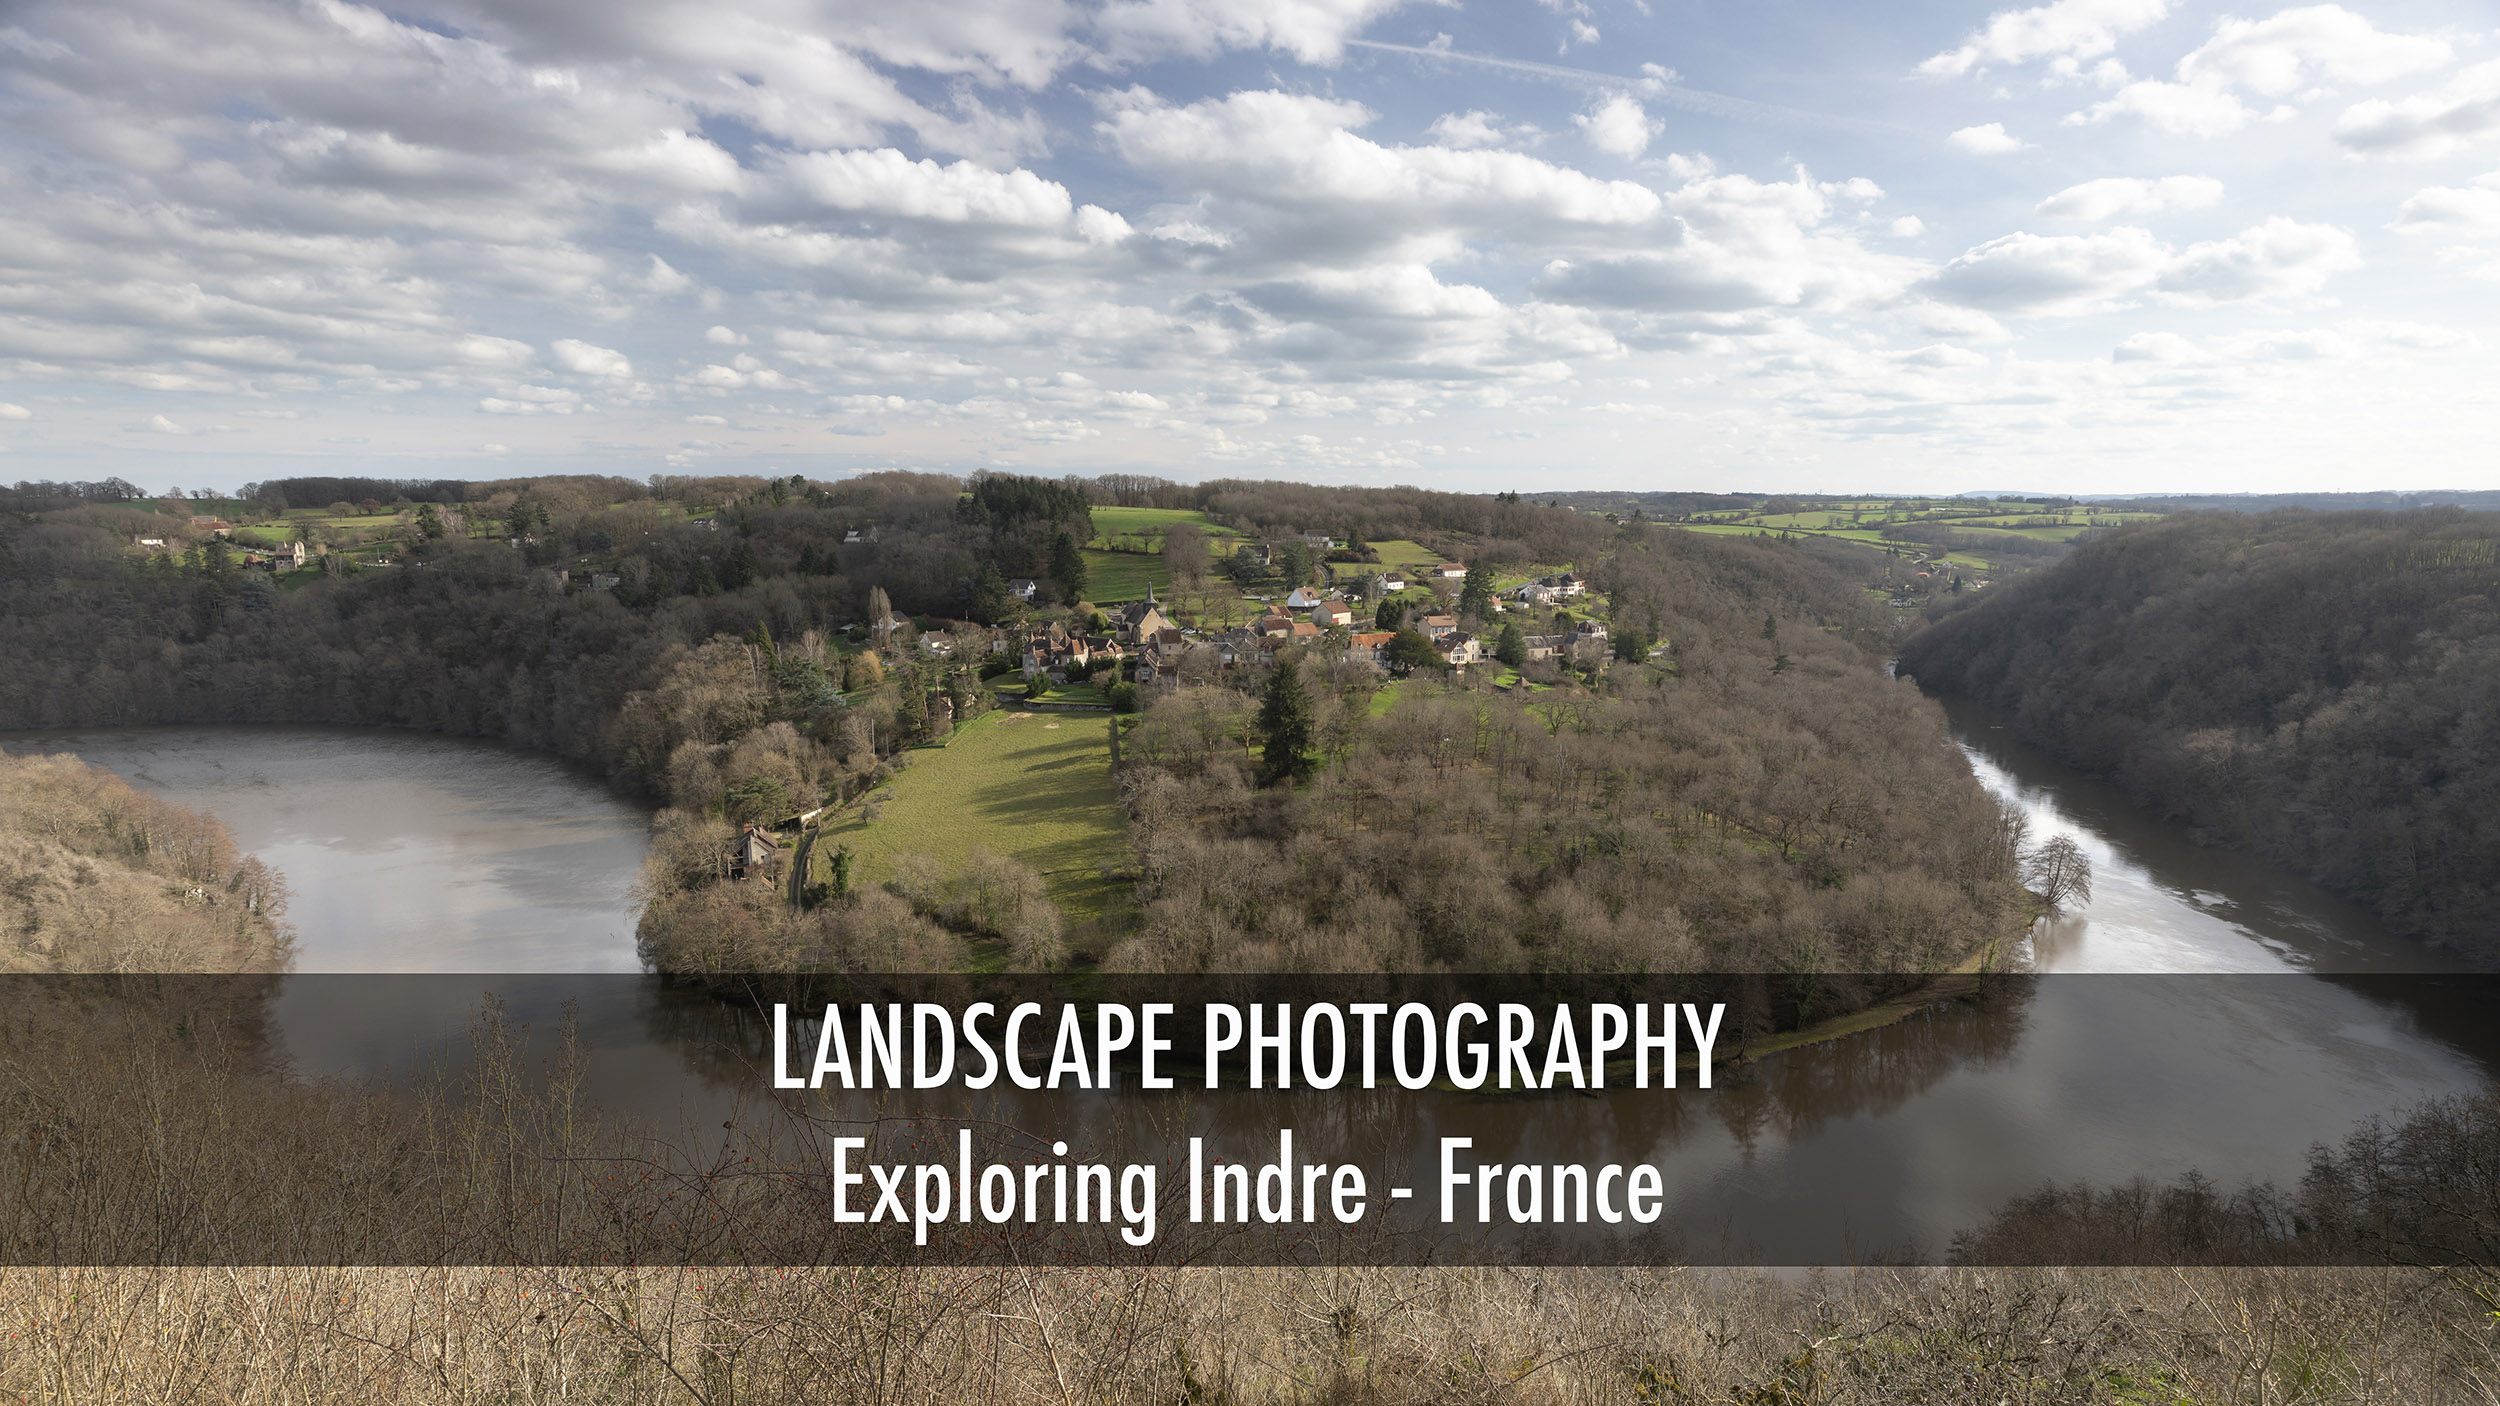 Exploring the department of Indre in France. Landscape photography.